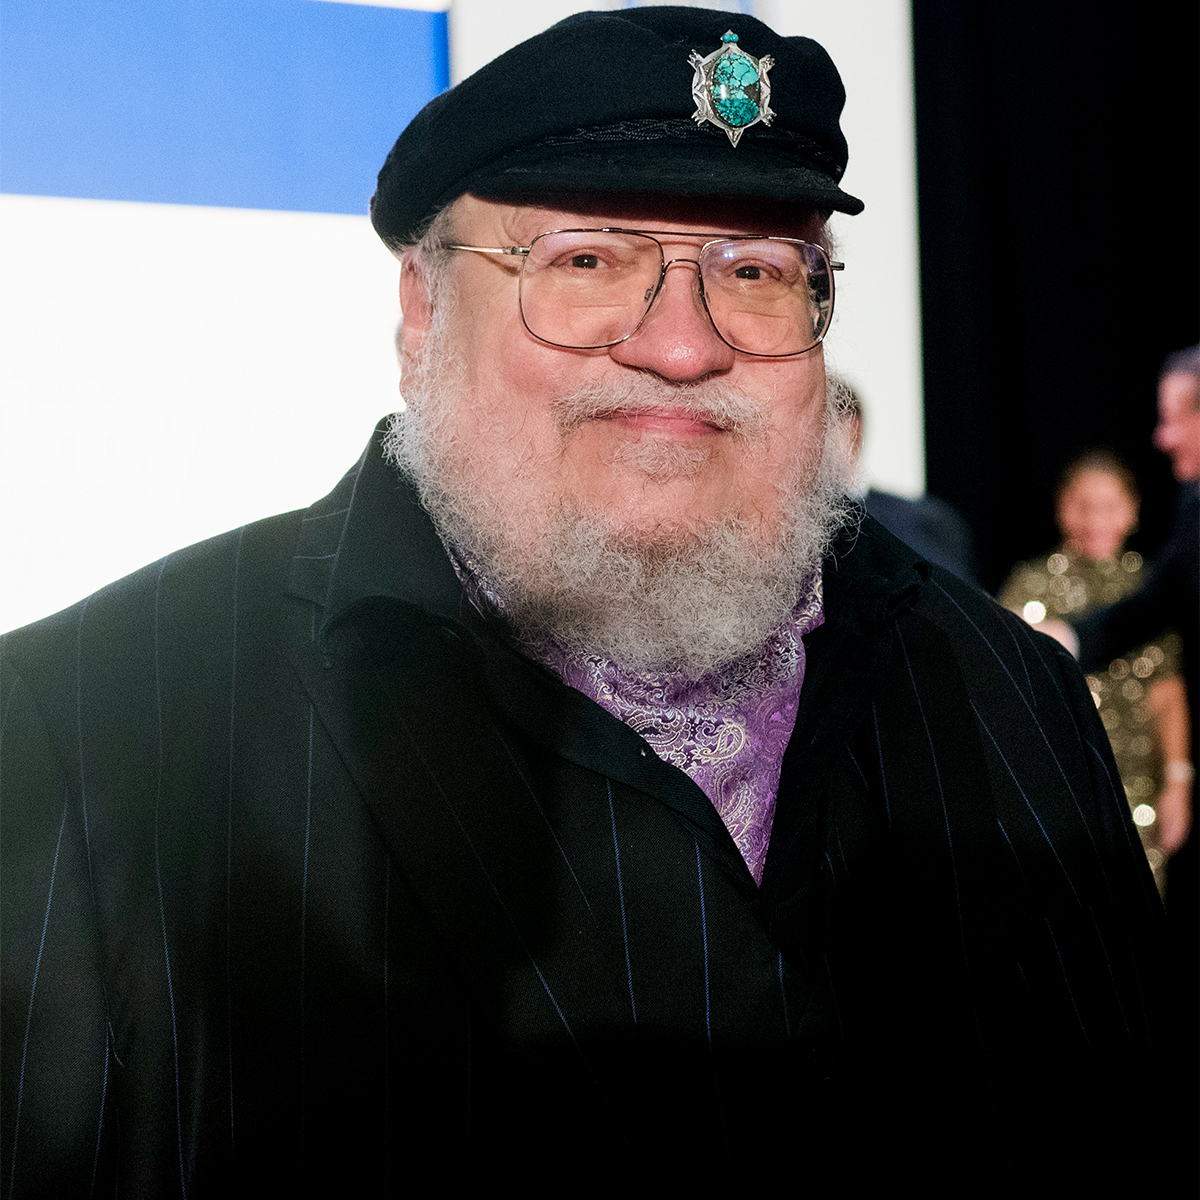 What George R.R. Martin Has to Say About LOTR Series